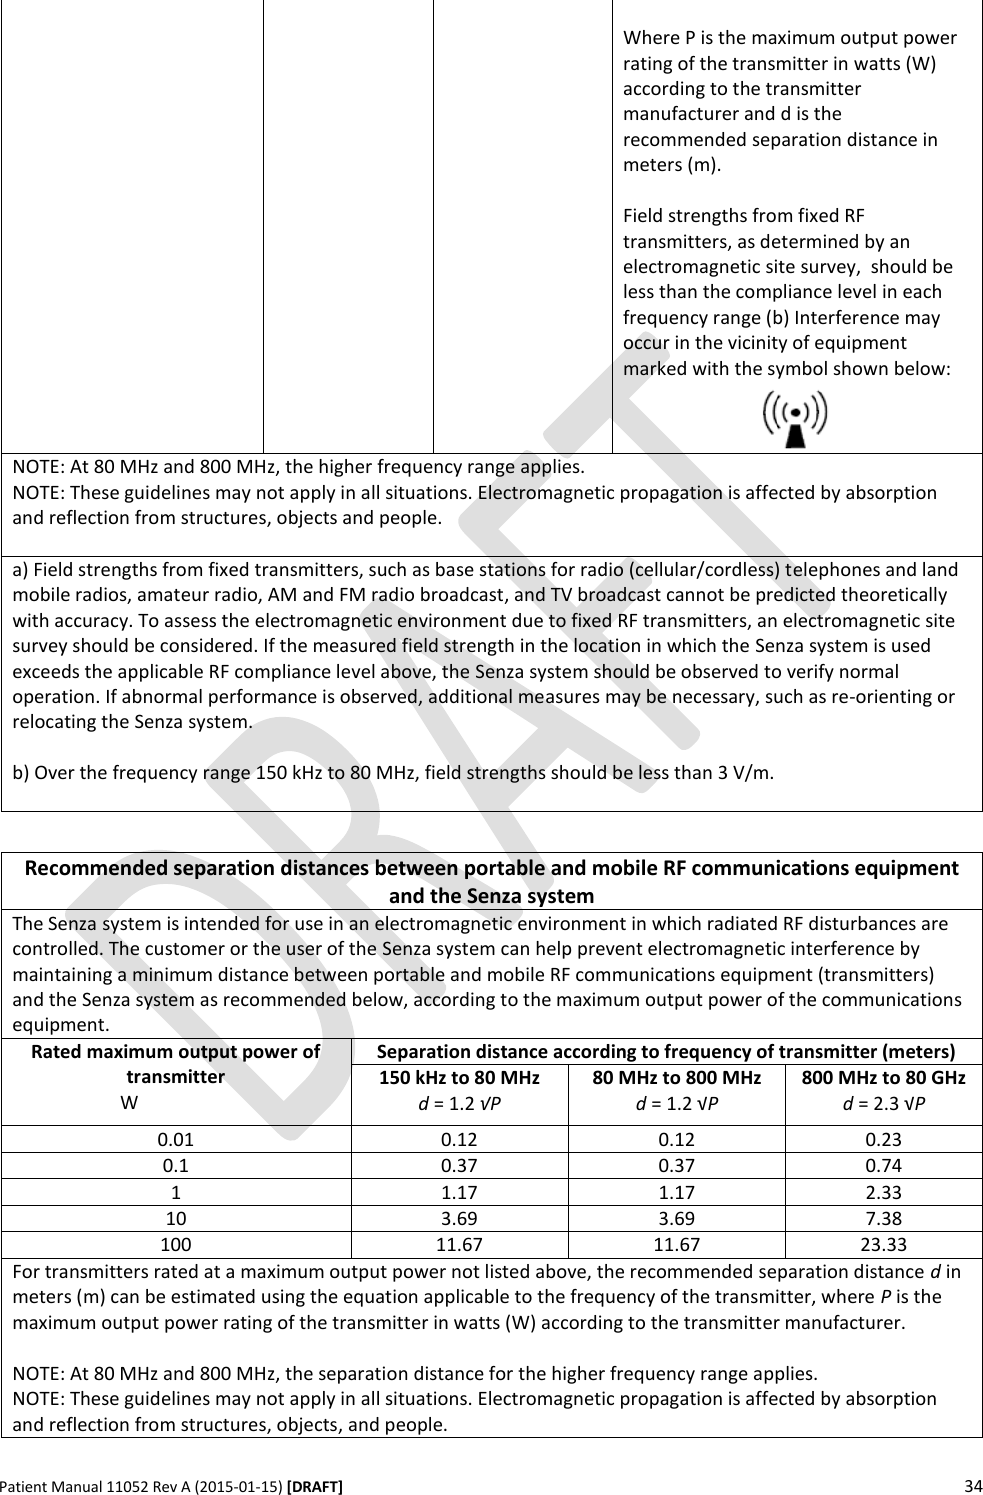      Patient Manual 11052 Rev A (2015-01-15) [DRAFT] 34        Where P is the maximum output power rating of the transmitter in watts (W) according to the transmitter manufacturer and d is the recommended separation distance in meters (m).   Field strengths from fixed RF transmitters, as determined by an electromagnetic site survey,  should be less than the compliance level in each frequency range (b) Interference may occur in the vicinity of equipment marked with the symbol shown below:  NOTE: At 80 MHz and 800 MHz, the higher frequency range applies. NOTE: These guidelines may not apply in all situations. Electromagnetic propagation is affected by absorption and reflection from structures, objects and people.  a) Field strengths from fixed transmitters, such as base stations for radio (cellular/cordless) telephones and land mobile radios, amateur radio, AM and FM radio broadcast, and TV broadcast cannot be predicted theoretically with accuracy. To assess the electromagnetic environment due to fixed RF transmitters, an electromagnetic site survey should be considered. If the measured field strength in the location in which the Senza system is used exceeds the applicable RF compliance level above, the Senza system should be observed to verify normal operation. If abnormal performance is observed, additional measures may be necessary, such as re-orienting or relocating the Senza system.  b) Over the frequency range 150 kHz to 80 MHz, field strengths should be less than 3 V/m.   Recommended separation distances between portable and mobile RF communications equipment and the Senza system The Senza system is intended for use in an electromagnetic environment in which radiated RF disturbances are controlled. The customer or the user of the Senza system can help prevent electromagnetic interference by maintaining a minimum distance between portable and mobile RF communications equipment (transmitters) and the Senza system as recommended below, according to the maximum output power of the communications equipment.  Rated maximum output power of transmitter W  Separation distance according to frequency of transmitter (meters) 150 kHz to 80 MHz d = 1.2 √P 80 MHz to 800 MHz d = 1.2 √P 800 MHz to 80 GHz d = 2.3 √P 0.01 0.12 0.12 0.23 0.1 0.37 0.37 0.74 1 1.17 1.17 2.33 10 3.69 3.69 7.38 100 11.67 11.67 23.33 For transmitters rated at a maximum output power not listed above, the recommended separation distance d in meters (m) can be estimated using the equation applicable to the frequency of the transmitter, where P is the maximum output power rating of the transmitter in watts (W) according to the transmitter manufacturer.  NOTE: At 80 MHz and 800 MHz, the separation distance for the higher frequency range applies.  NOTE: These guidelines may not apply in all situations. Electromagnetic propagation is affected by absorption and reflection from structures, objects, and people.  